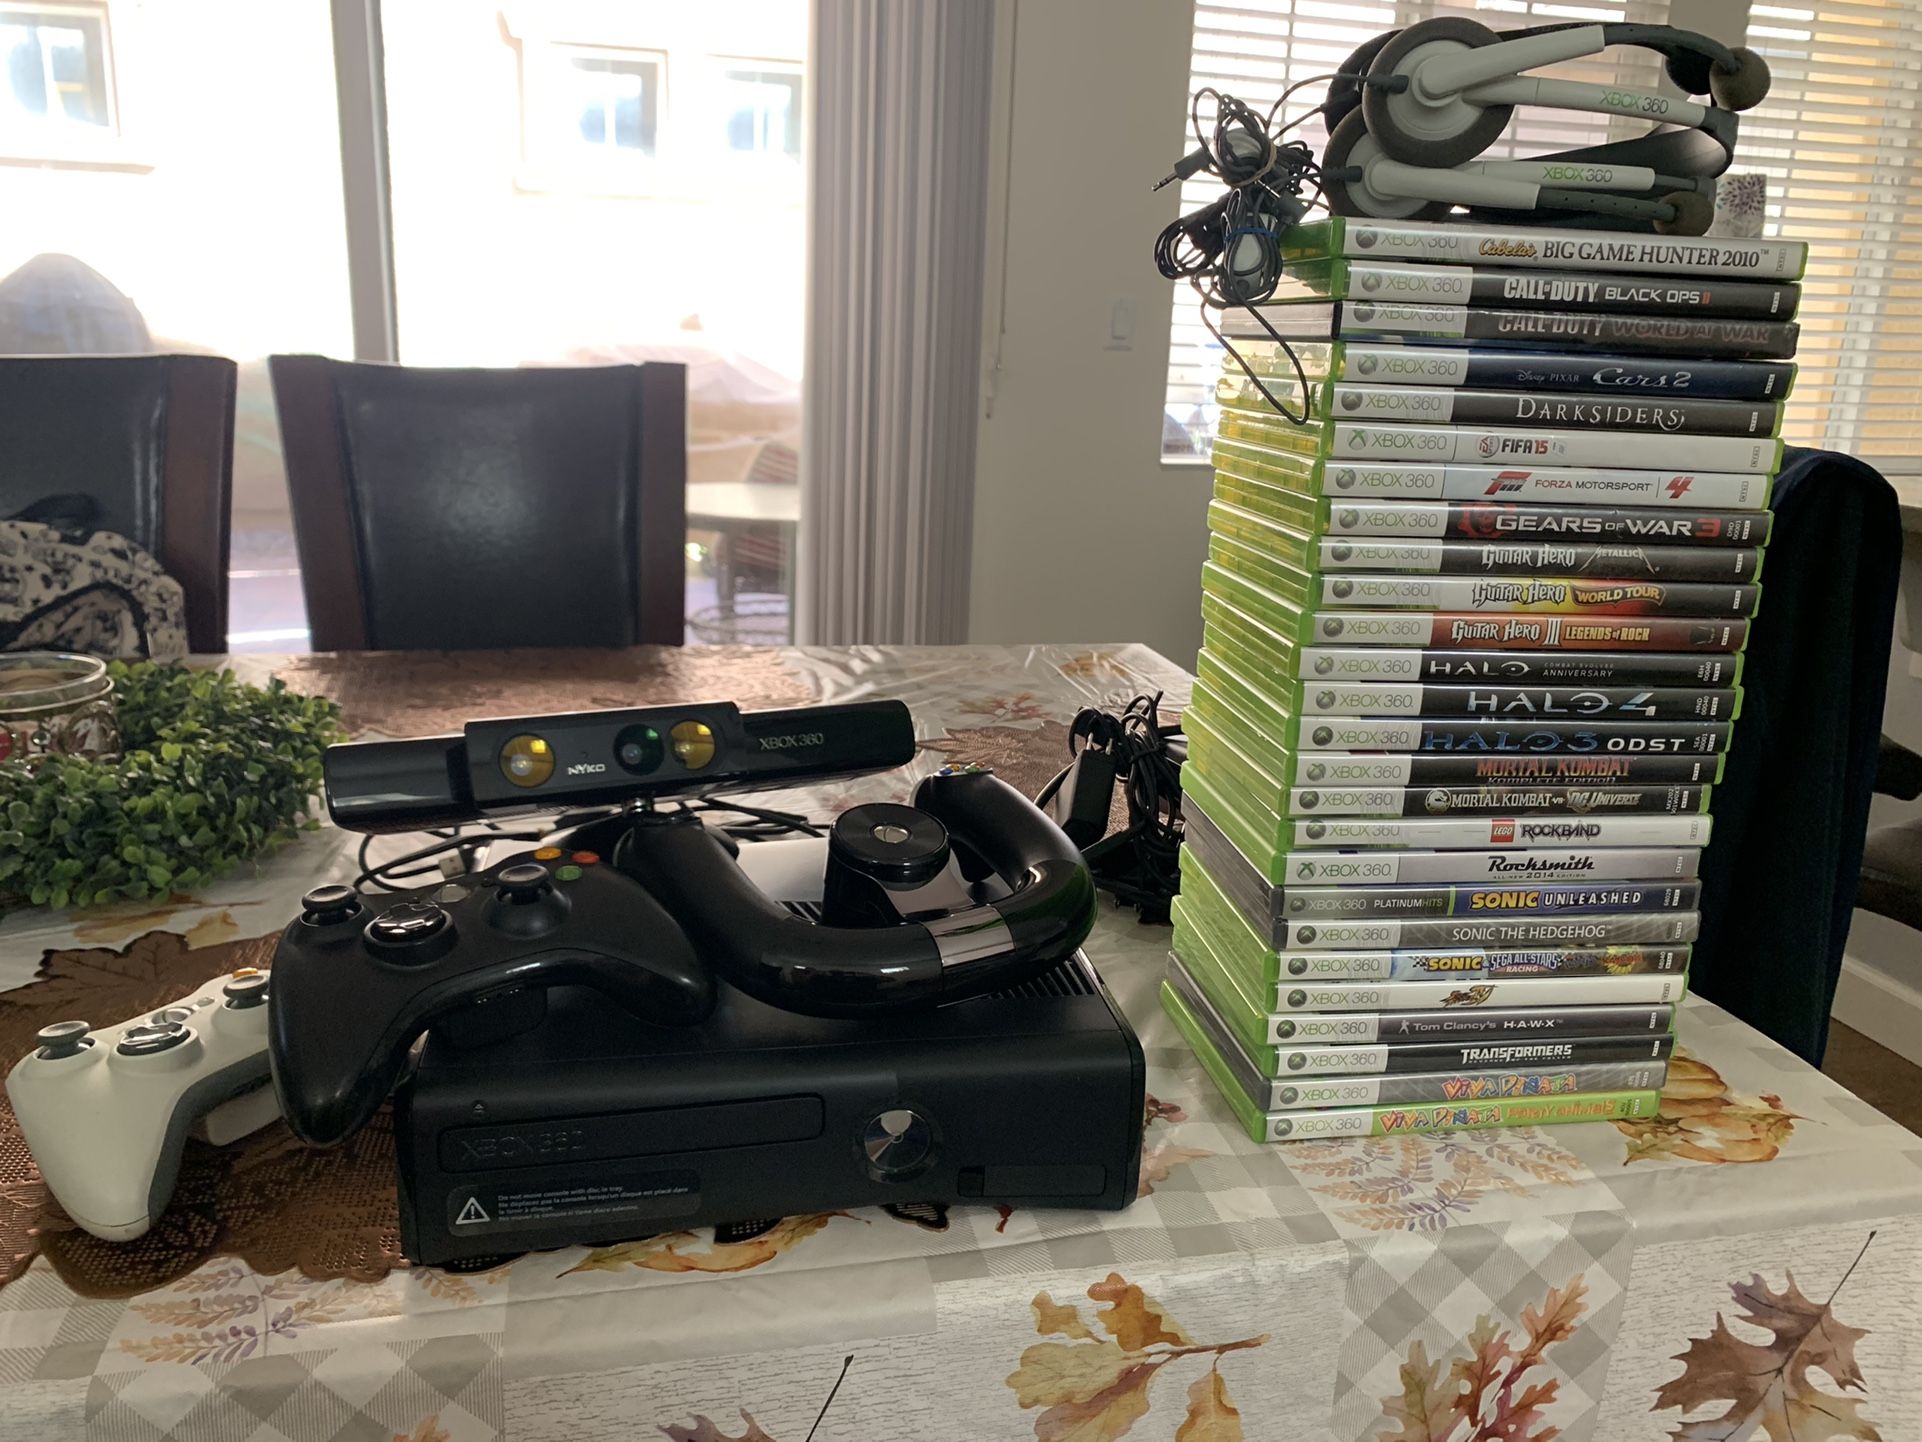 Xbox 360 Slim 250g with 26 games